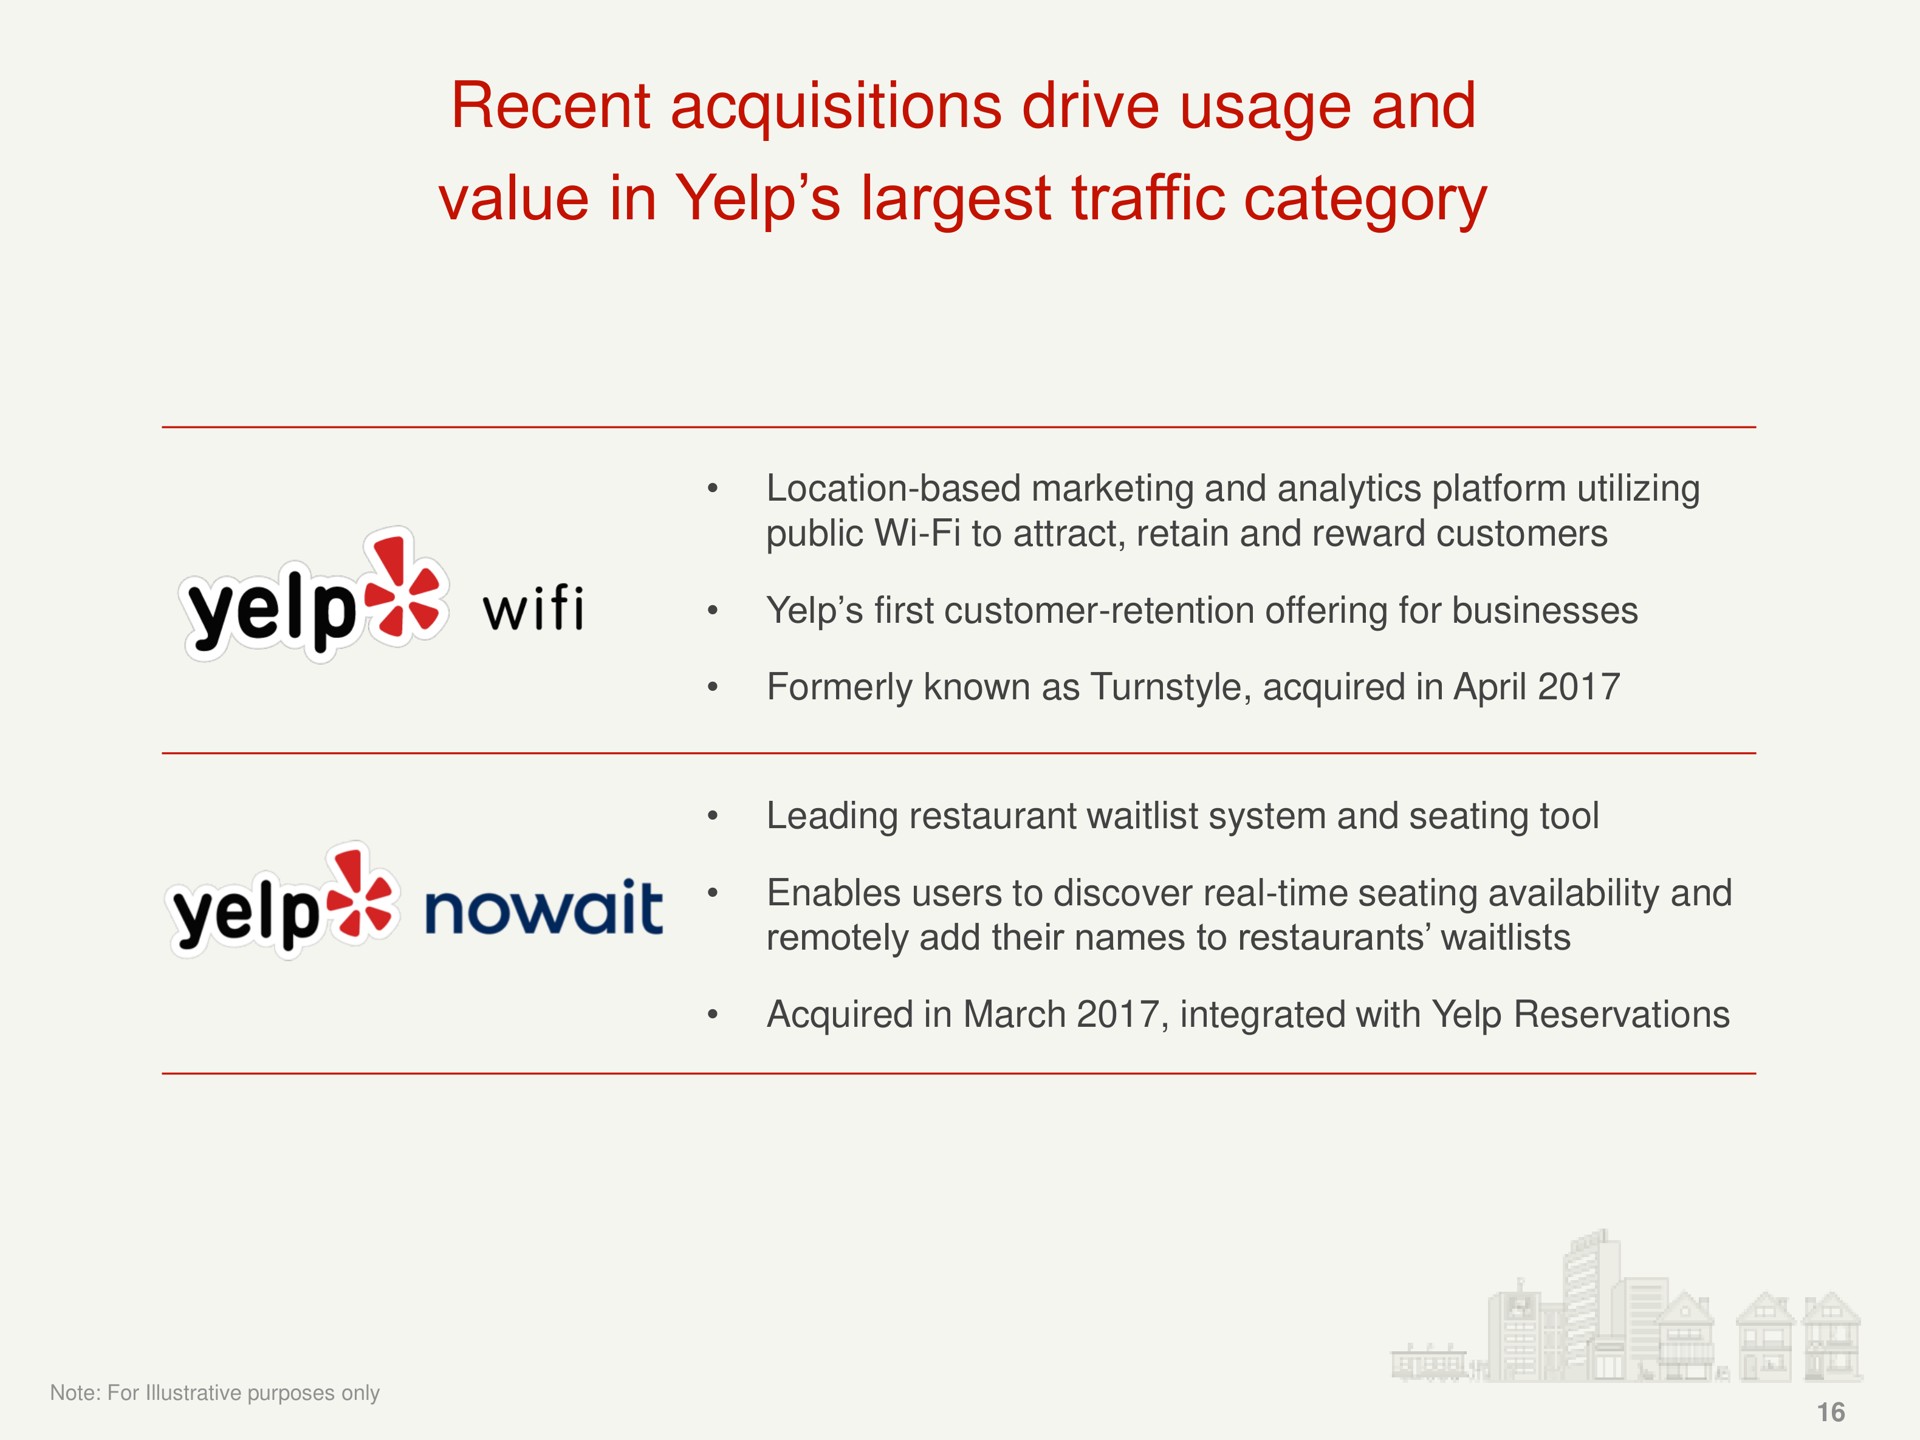 recent acquisitions drive usage and value in yelp traffic category yelps | Yelp